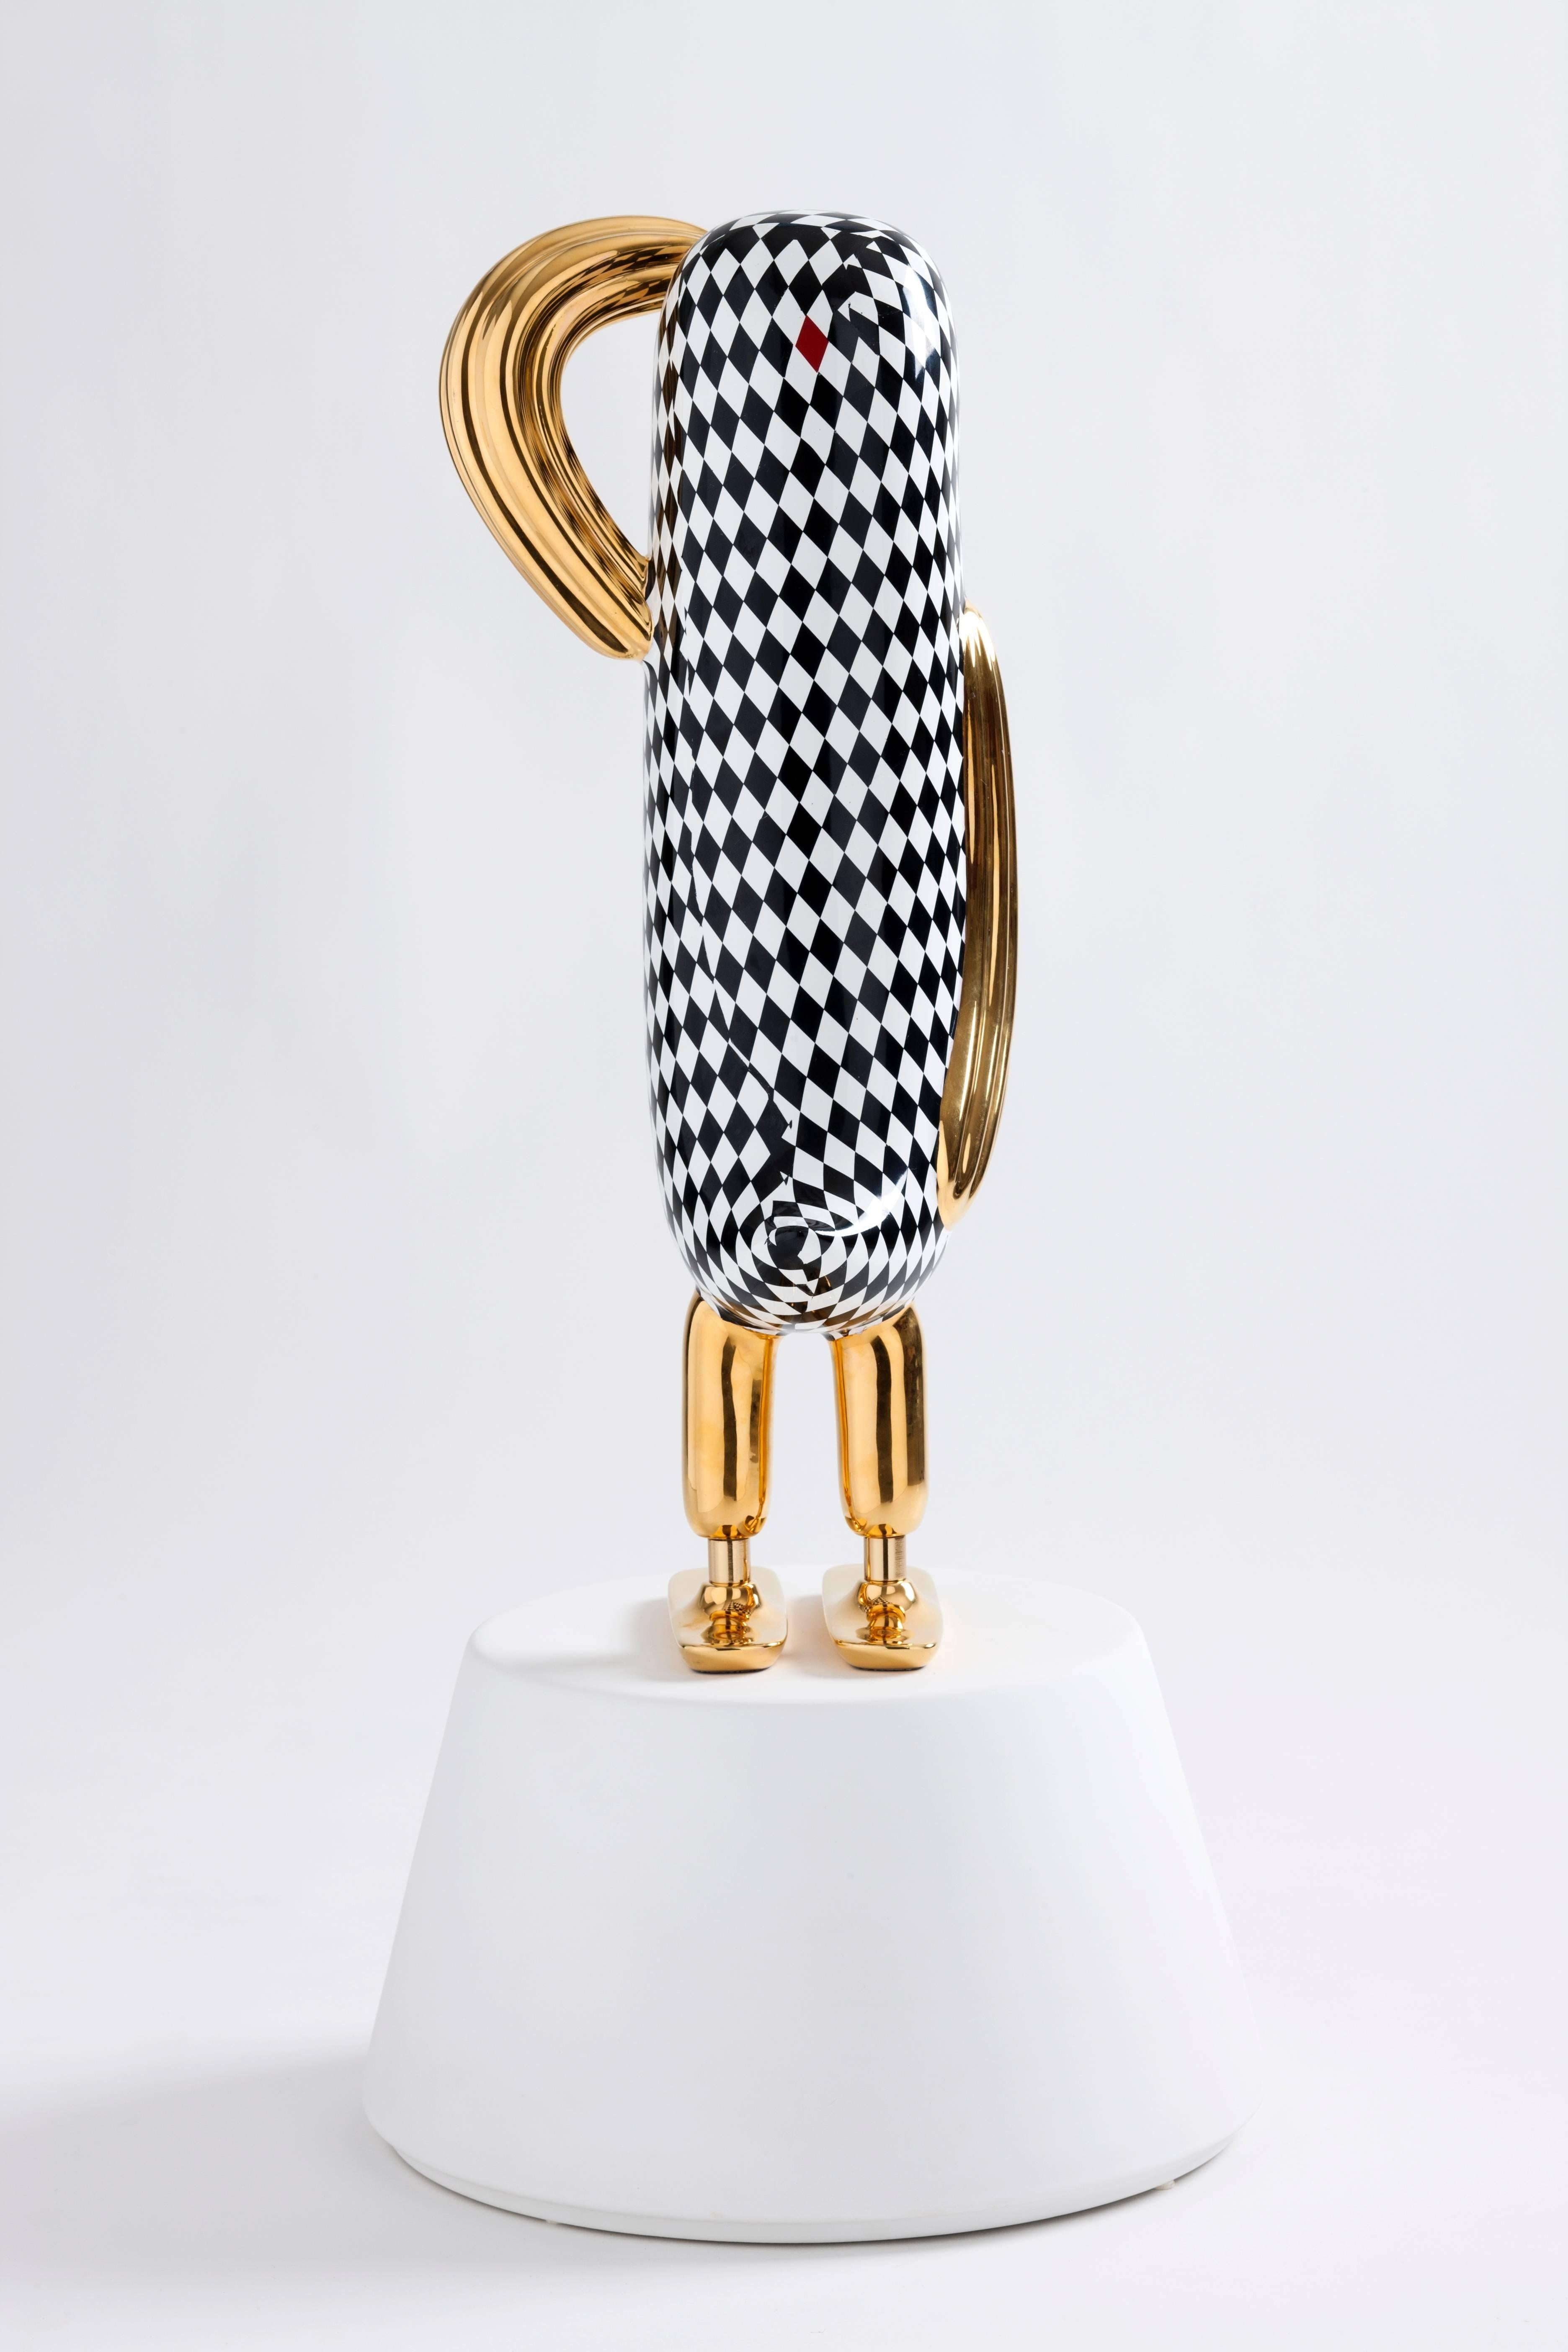 ‘Hope Bird’ is a tabletop-sized sculpture that symbolises the importance of “an optimistic approach to what lies ahead”. Designed for Italian ceramics manufacturer Bosa, the Hope Bird stands tall and proud in a watchful position, working to convey a